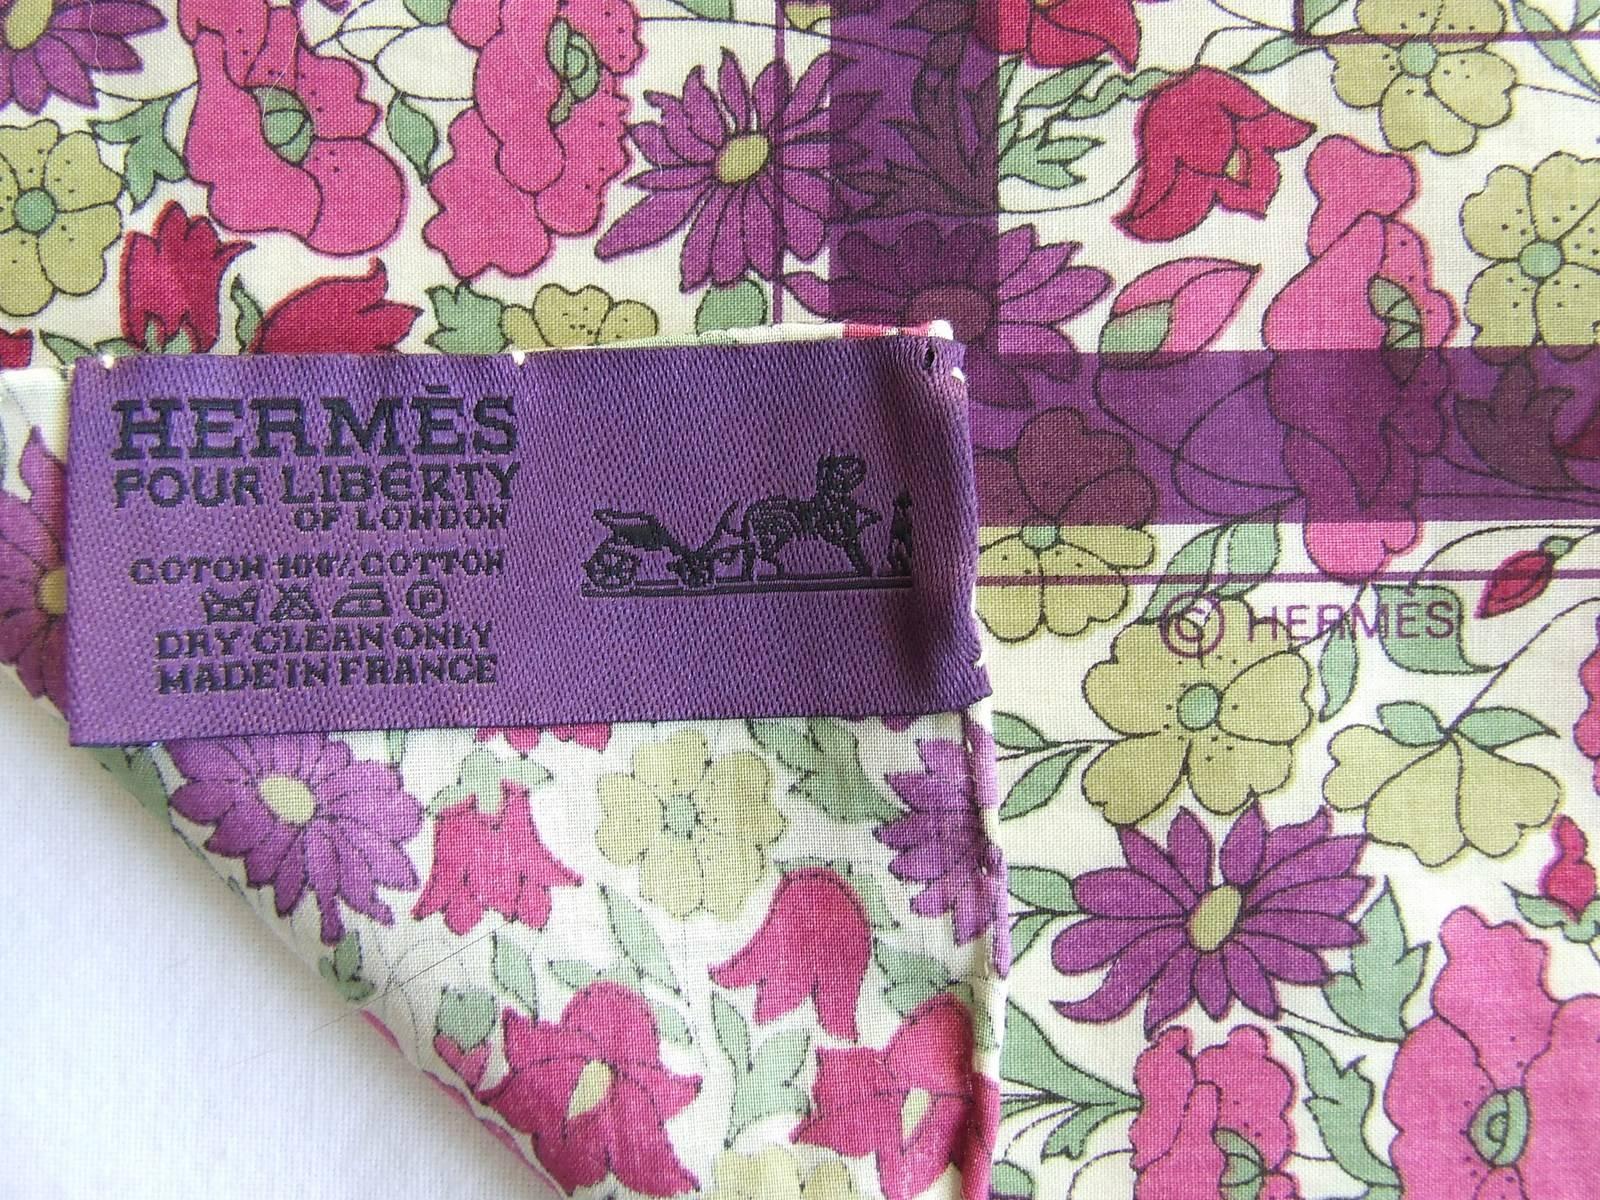 Limited Rare Hermes For Liberty Cotton Scarf Ex Libris and Flowers 70 cm 2